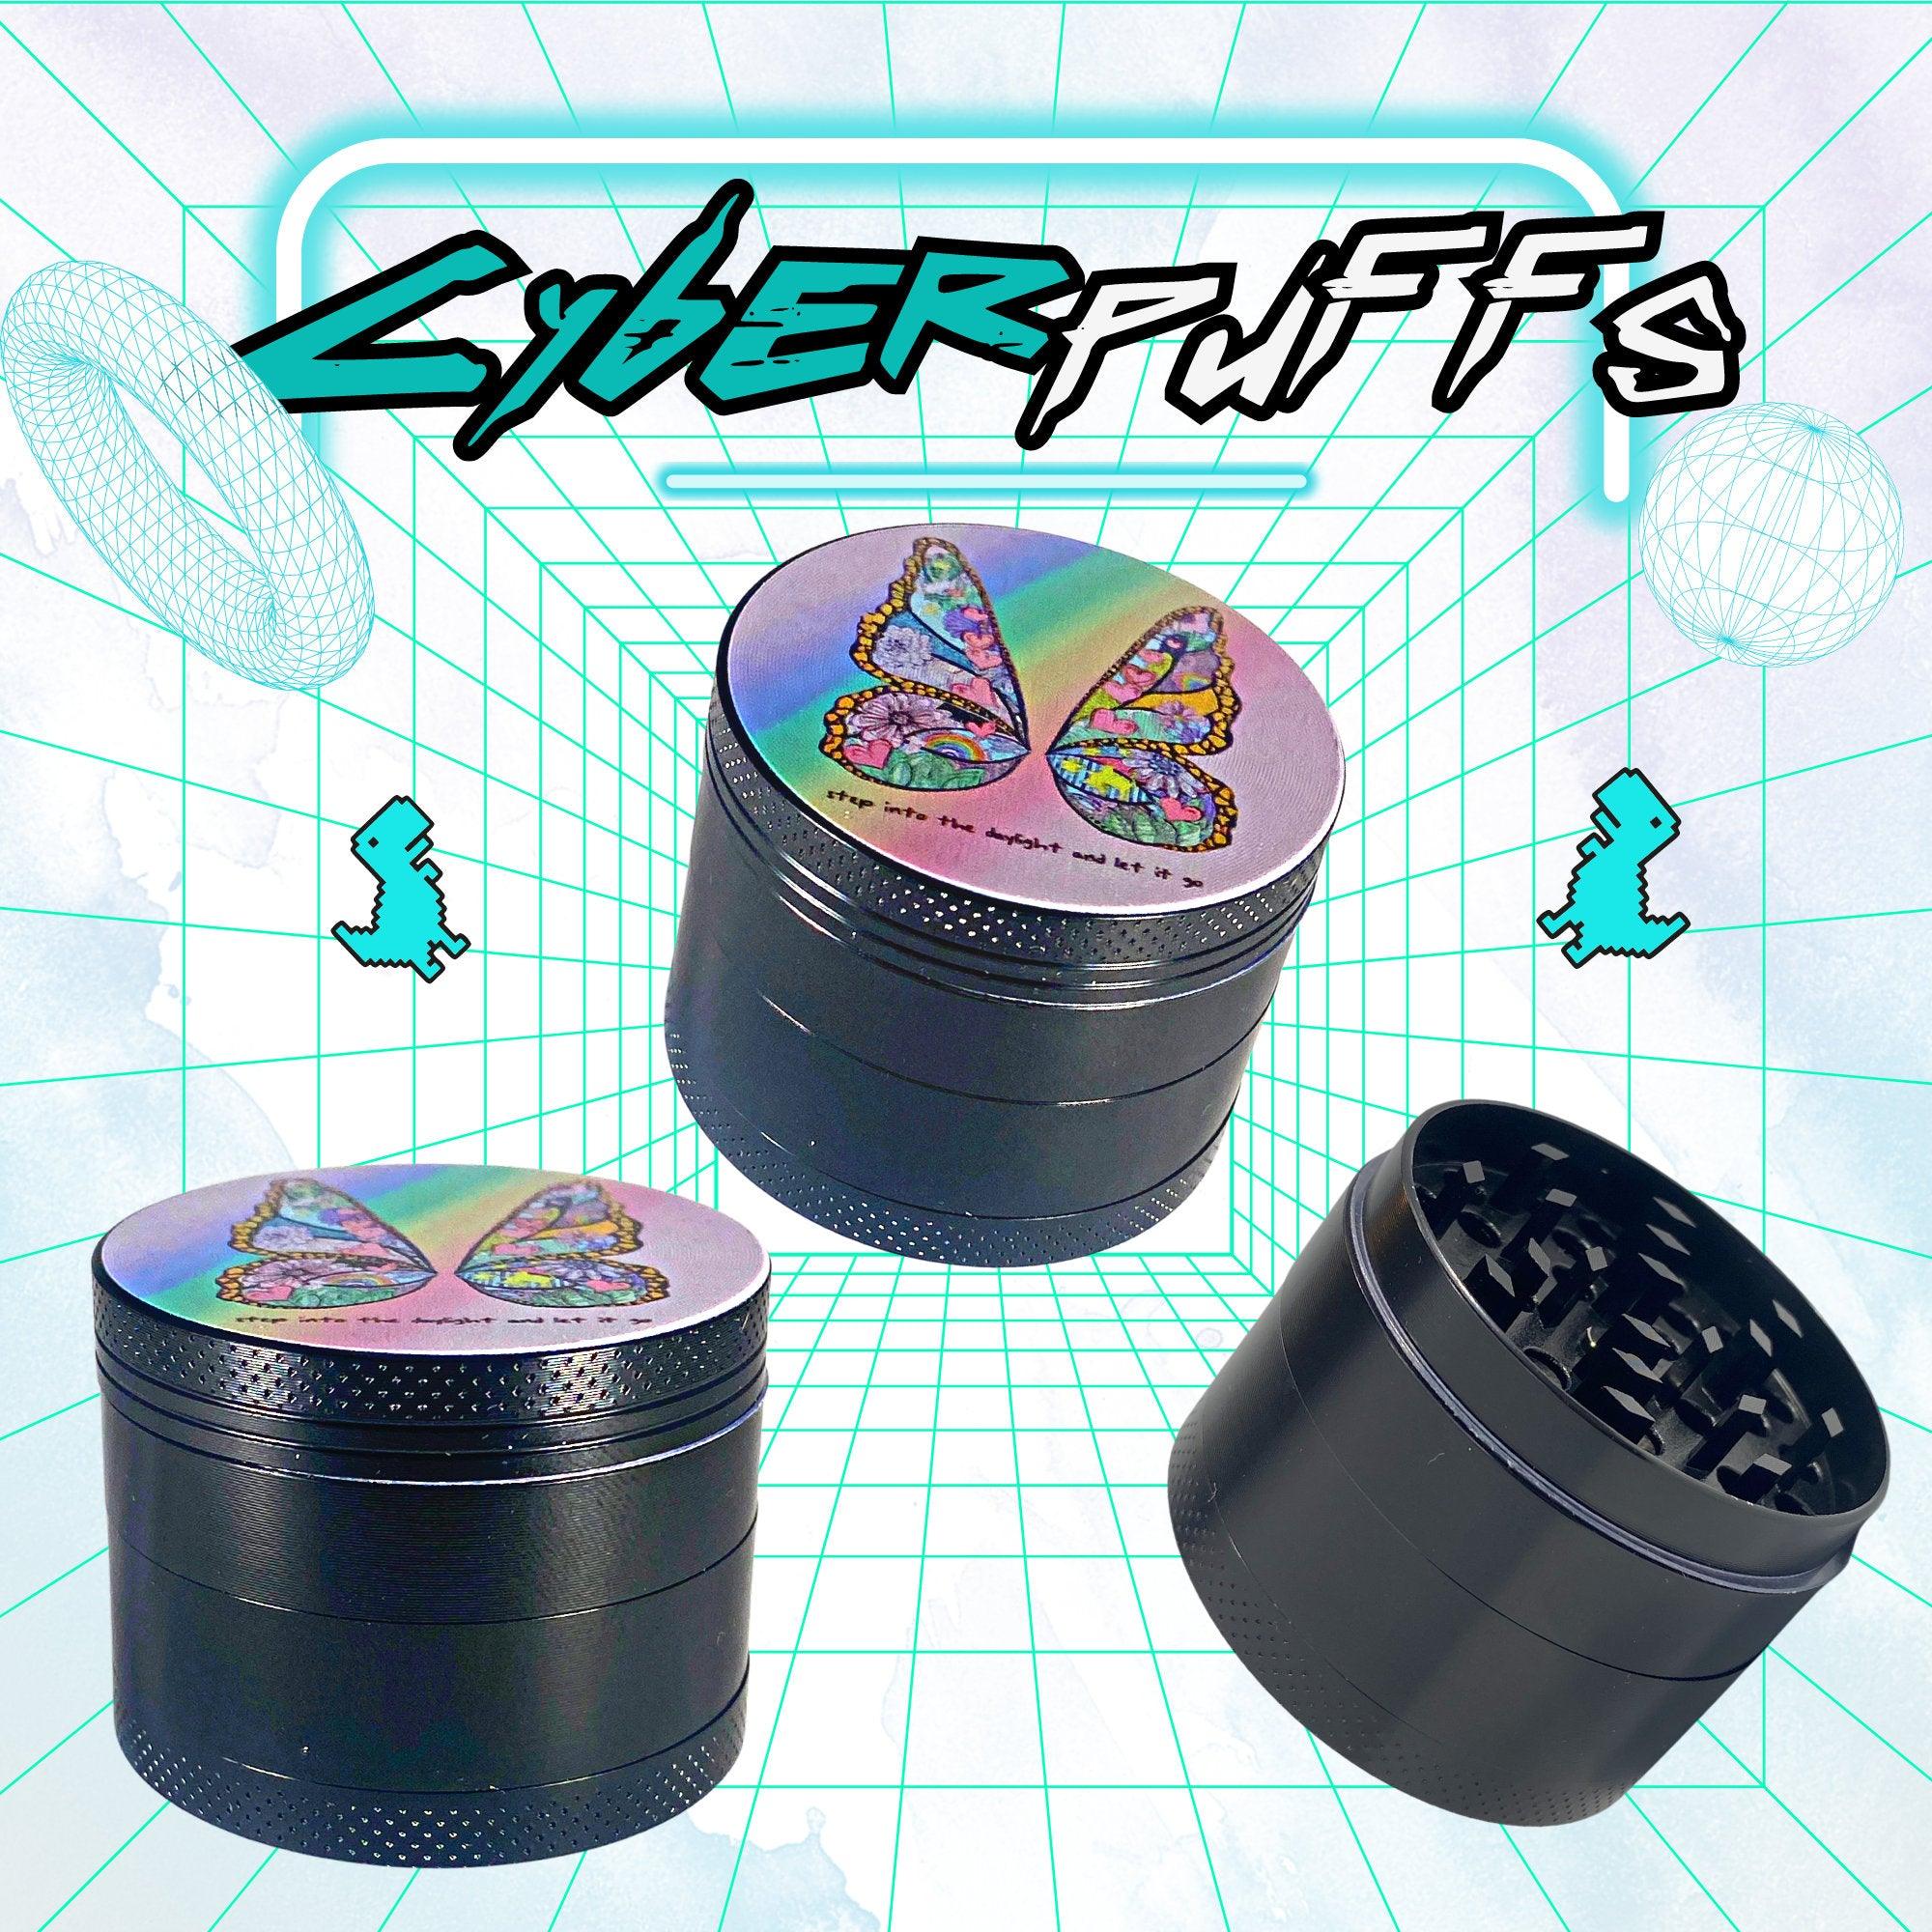 Butterfly Cute Weed Grinder | Rainbow, cannabis grinders, weed accessories, 4 piece grinder, cannabis, Pink Psychedelic Trippy Herb Girly